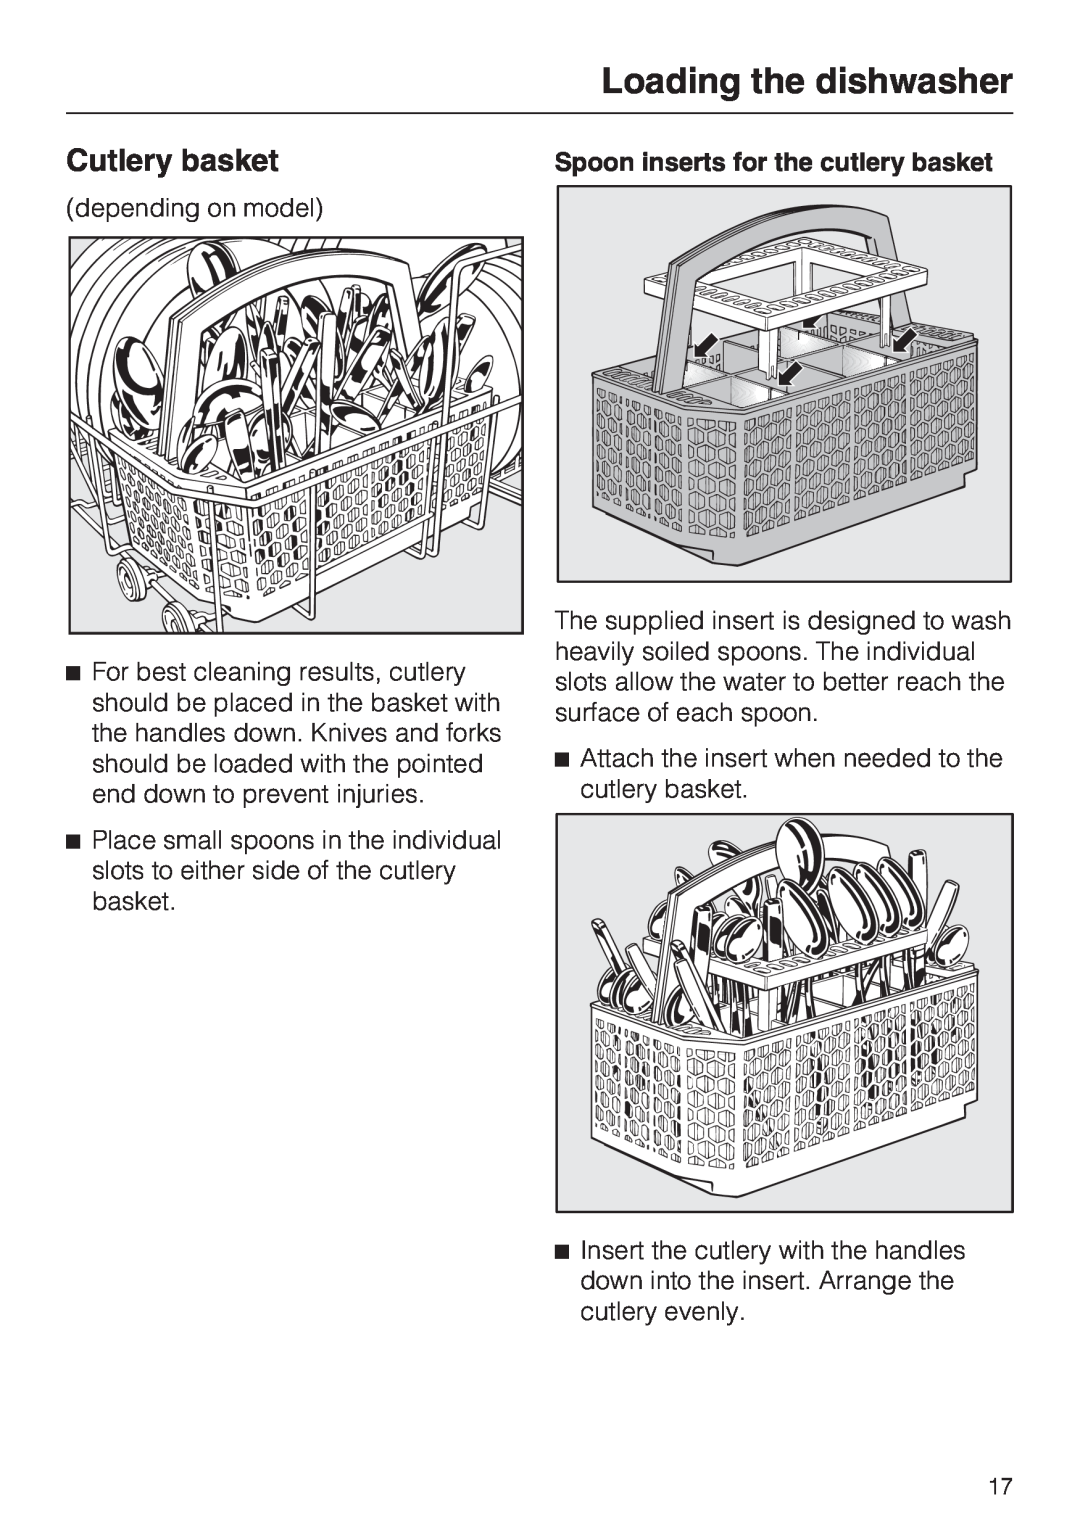 Miele G2142 operating instructions Cutlery basket, Loading the dishwasher, Spoon inserts for the cutlery basket 